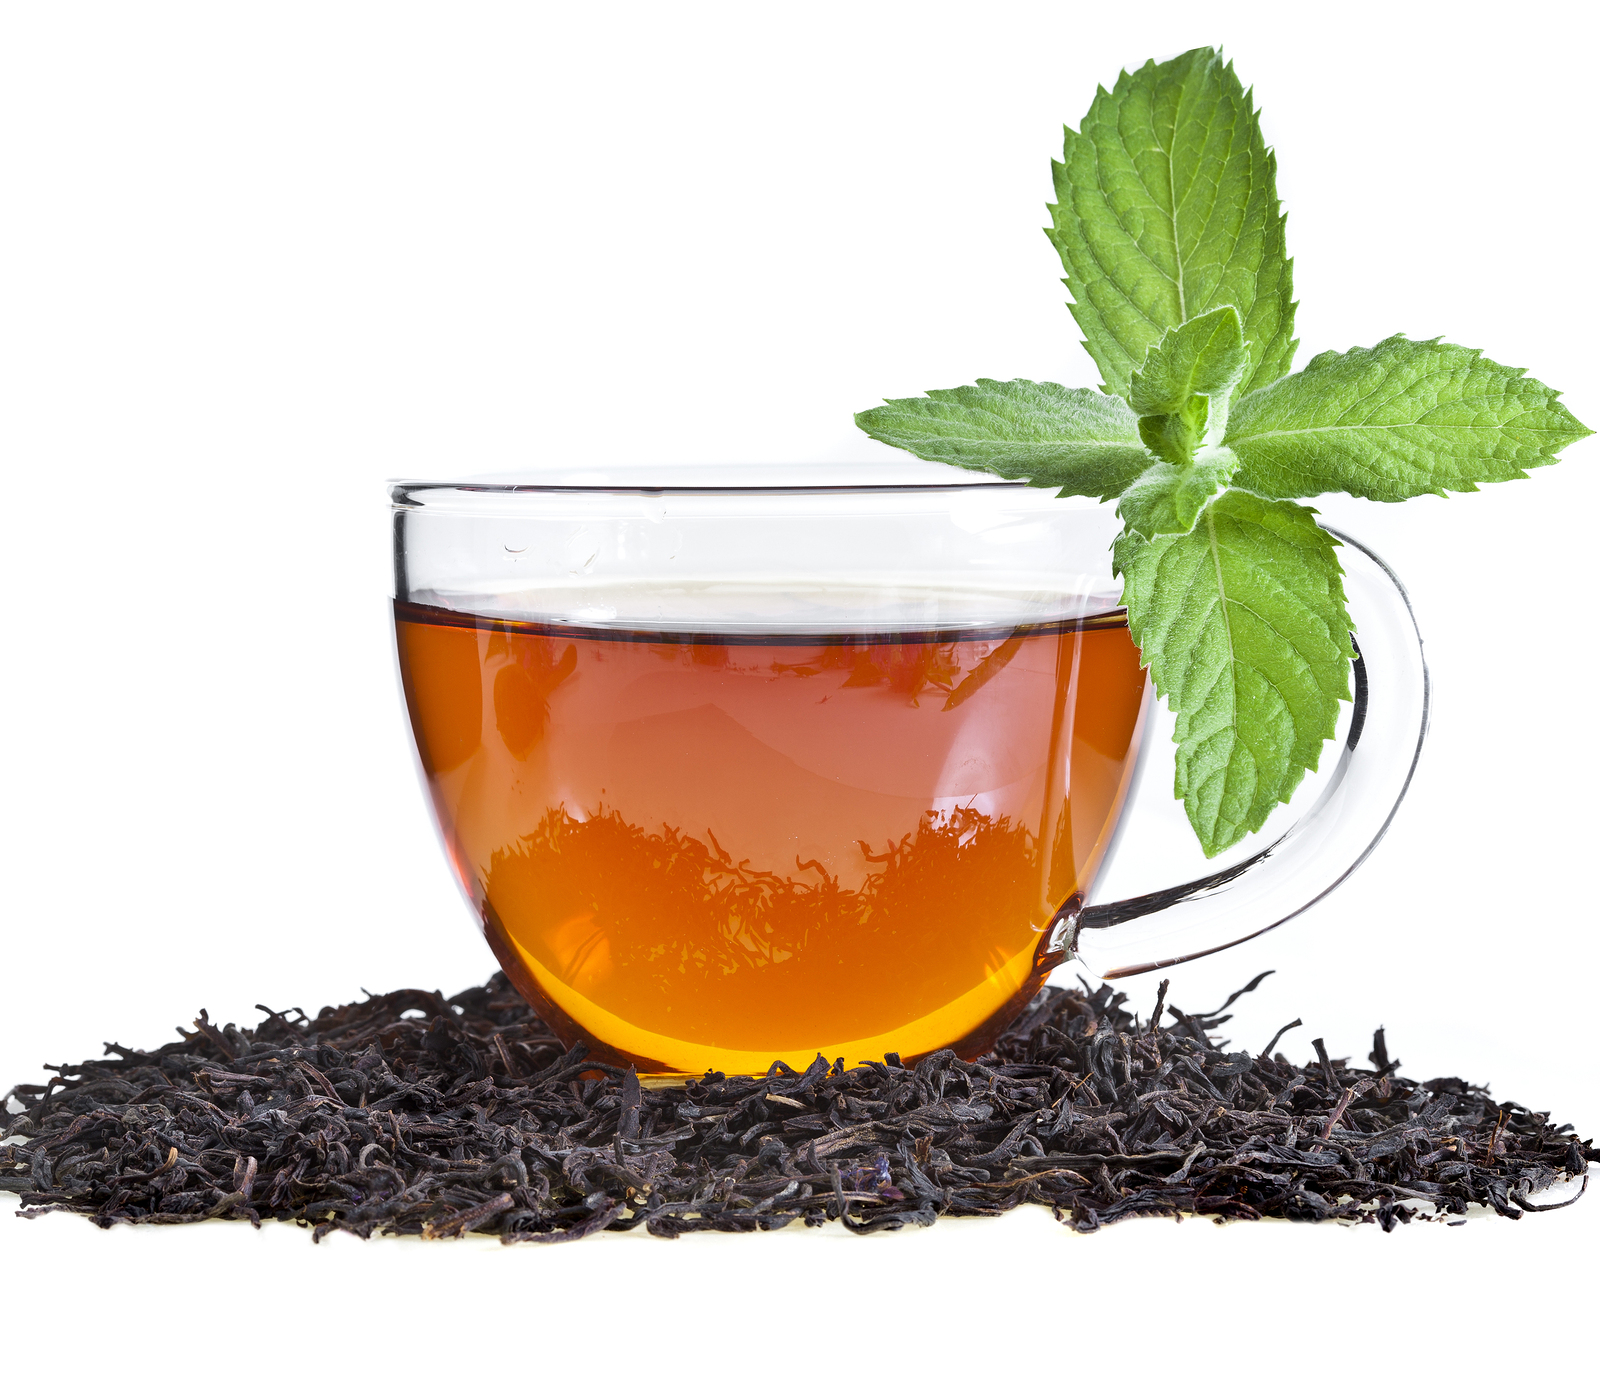 bigstock-Tea-cup-with-mint-leaves-on-a-36370273-1-1.jpg